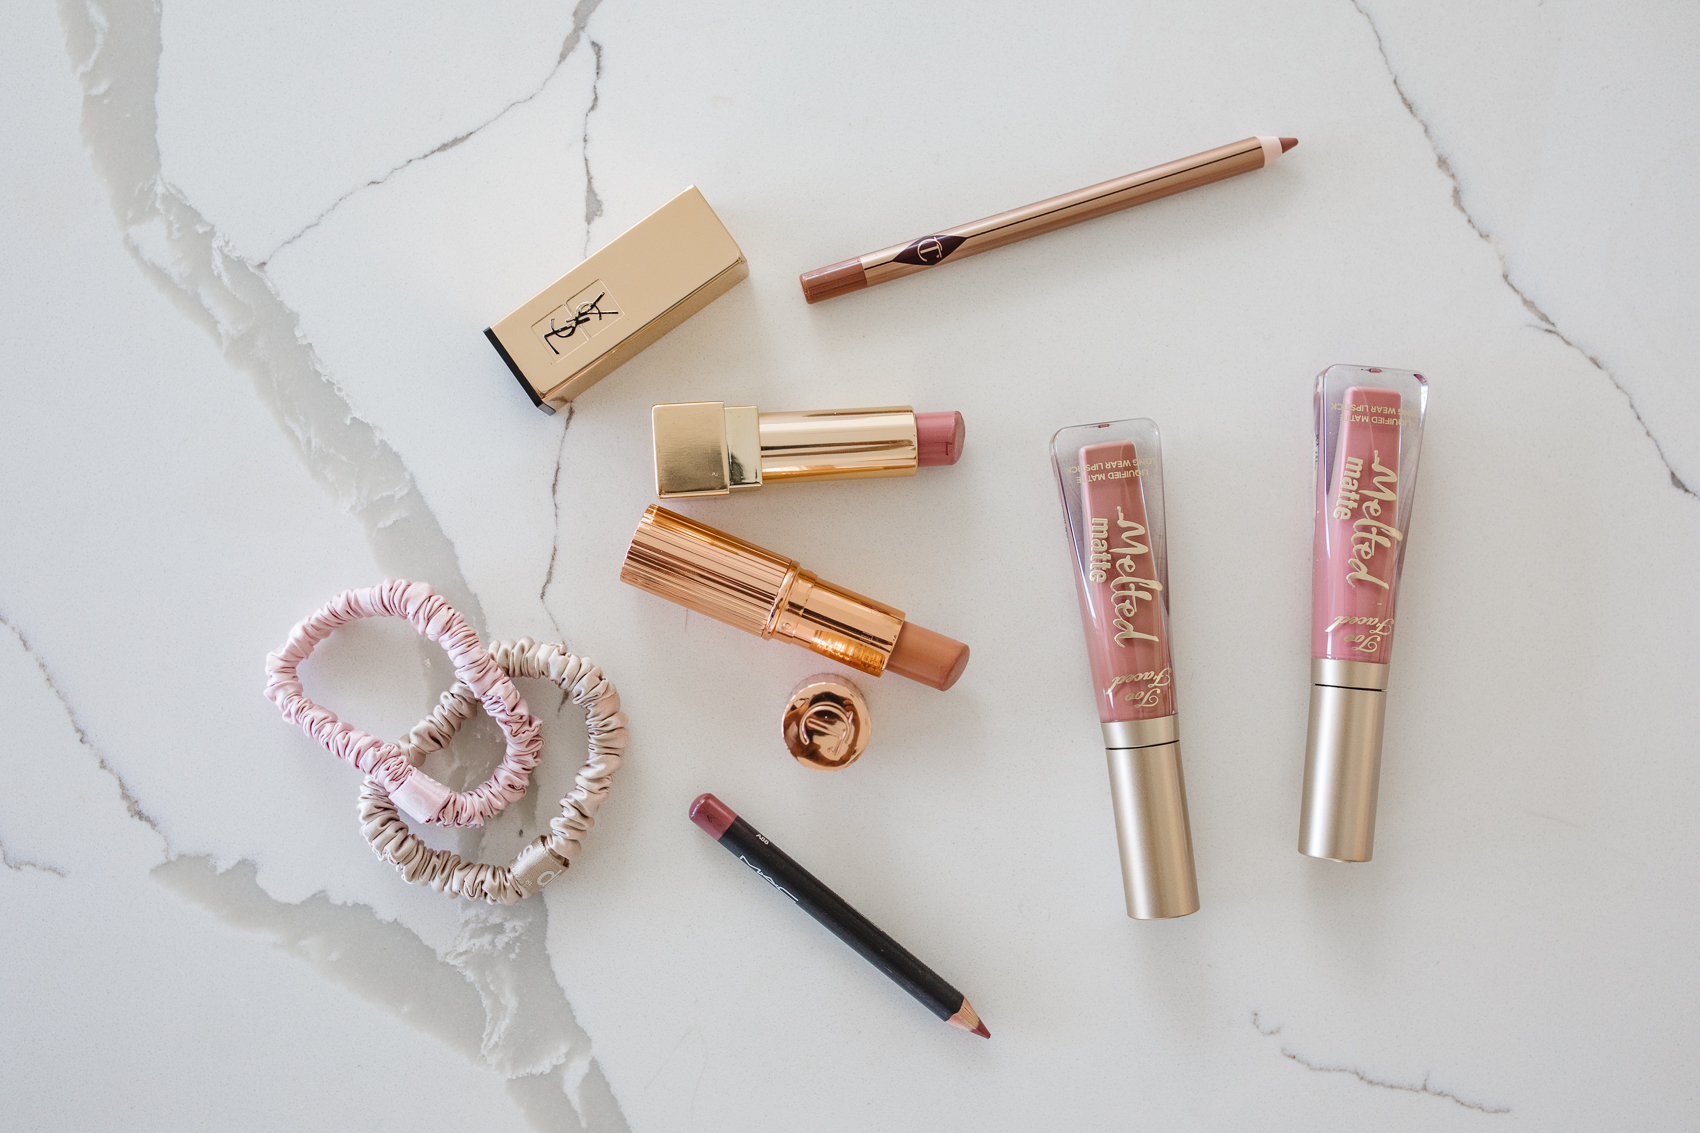 Nude pink lipsticks and liners including YSL Rouge Pur, Too Faced Melted Matte, Charlotte Tilbury Kissing Lipstick, Iconic Nude Liner on Calacutta foresta quartz countertop